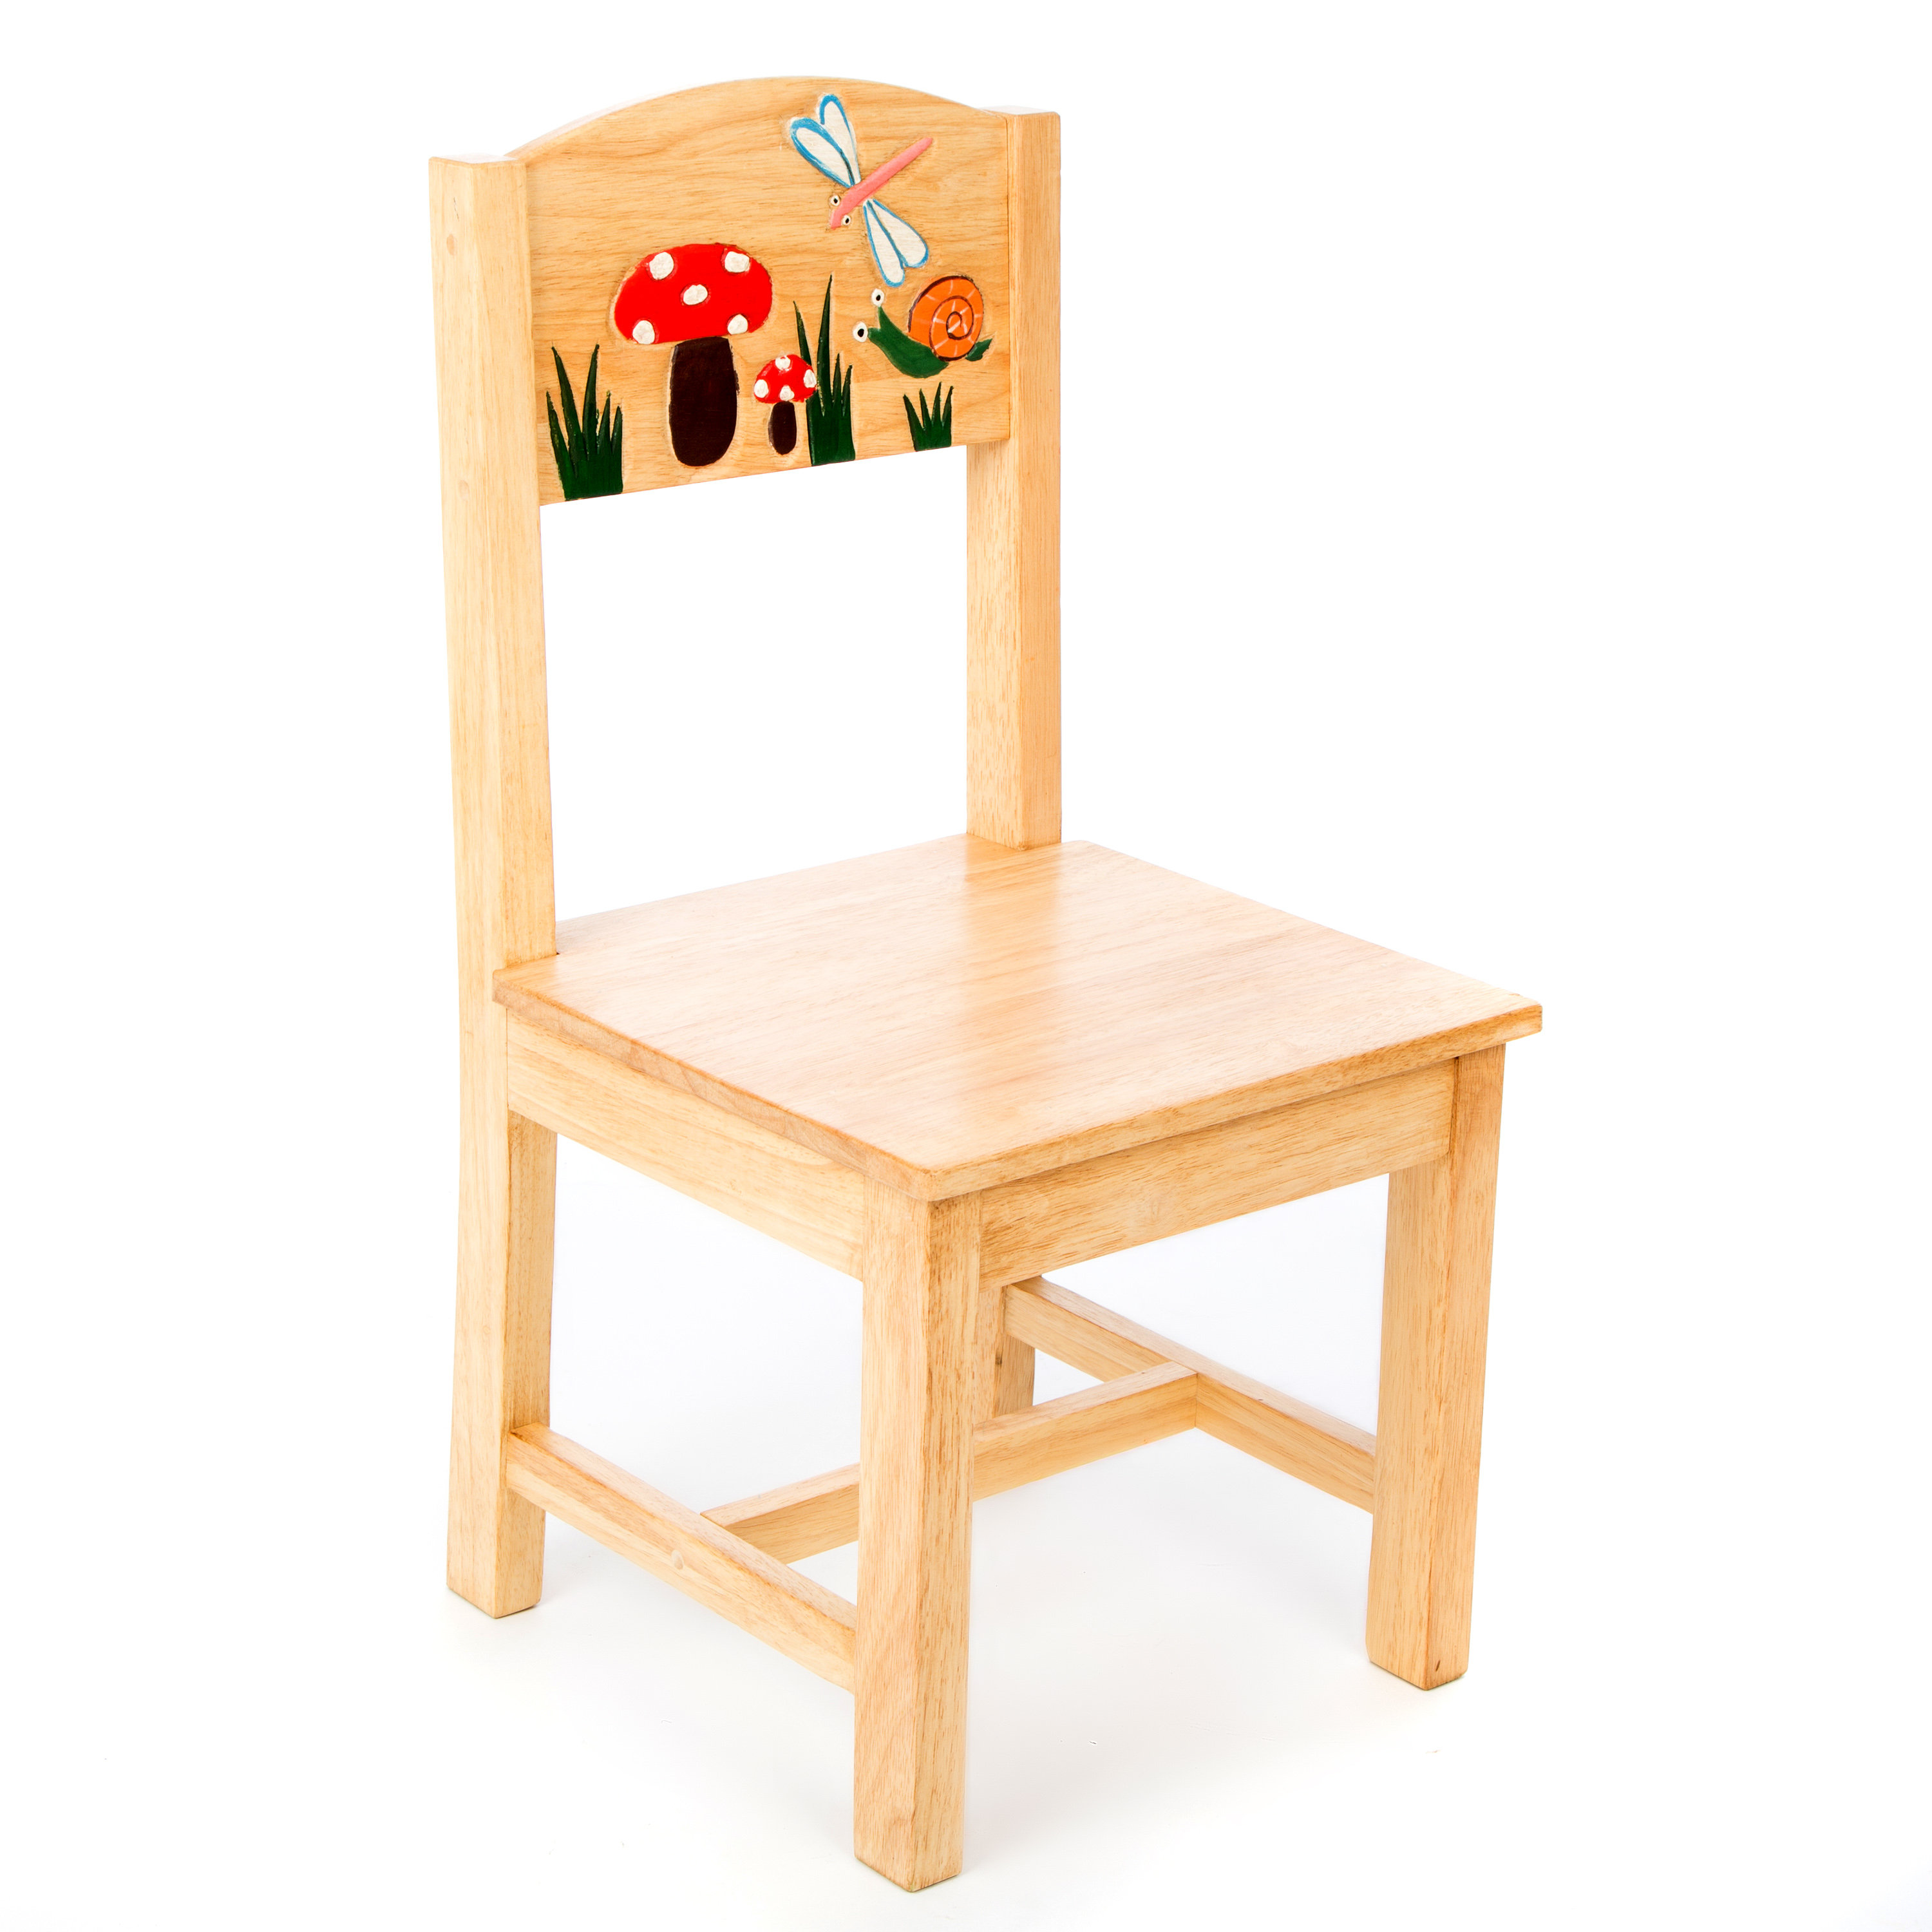 wooden childrens desk and chair